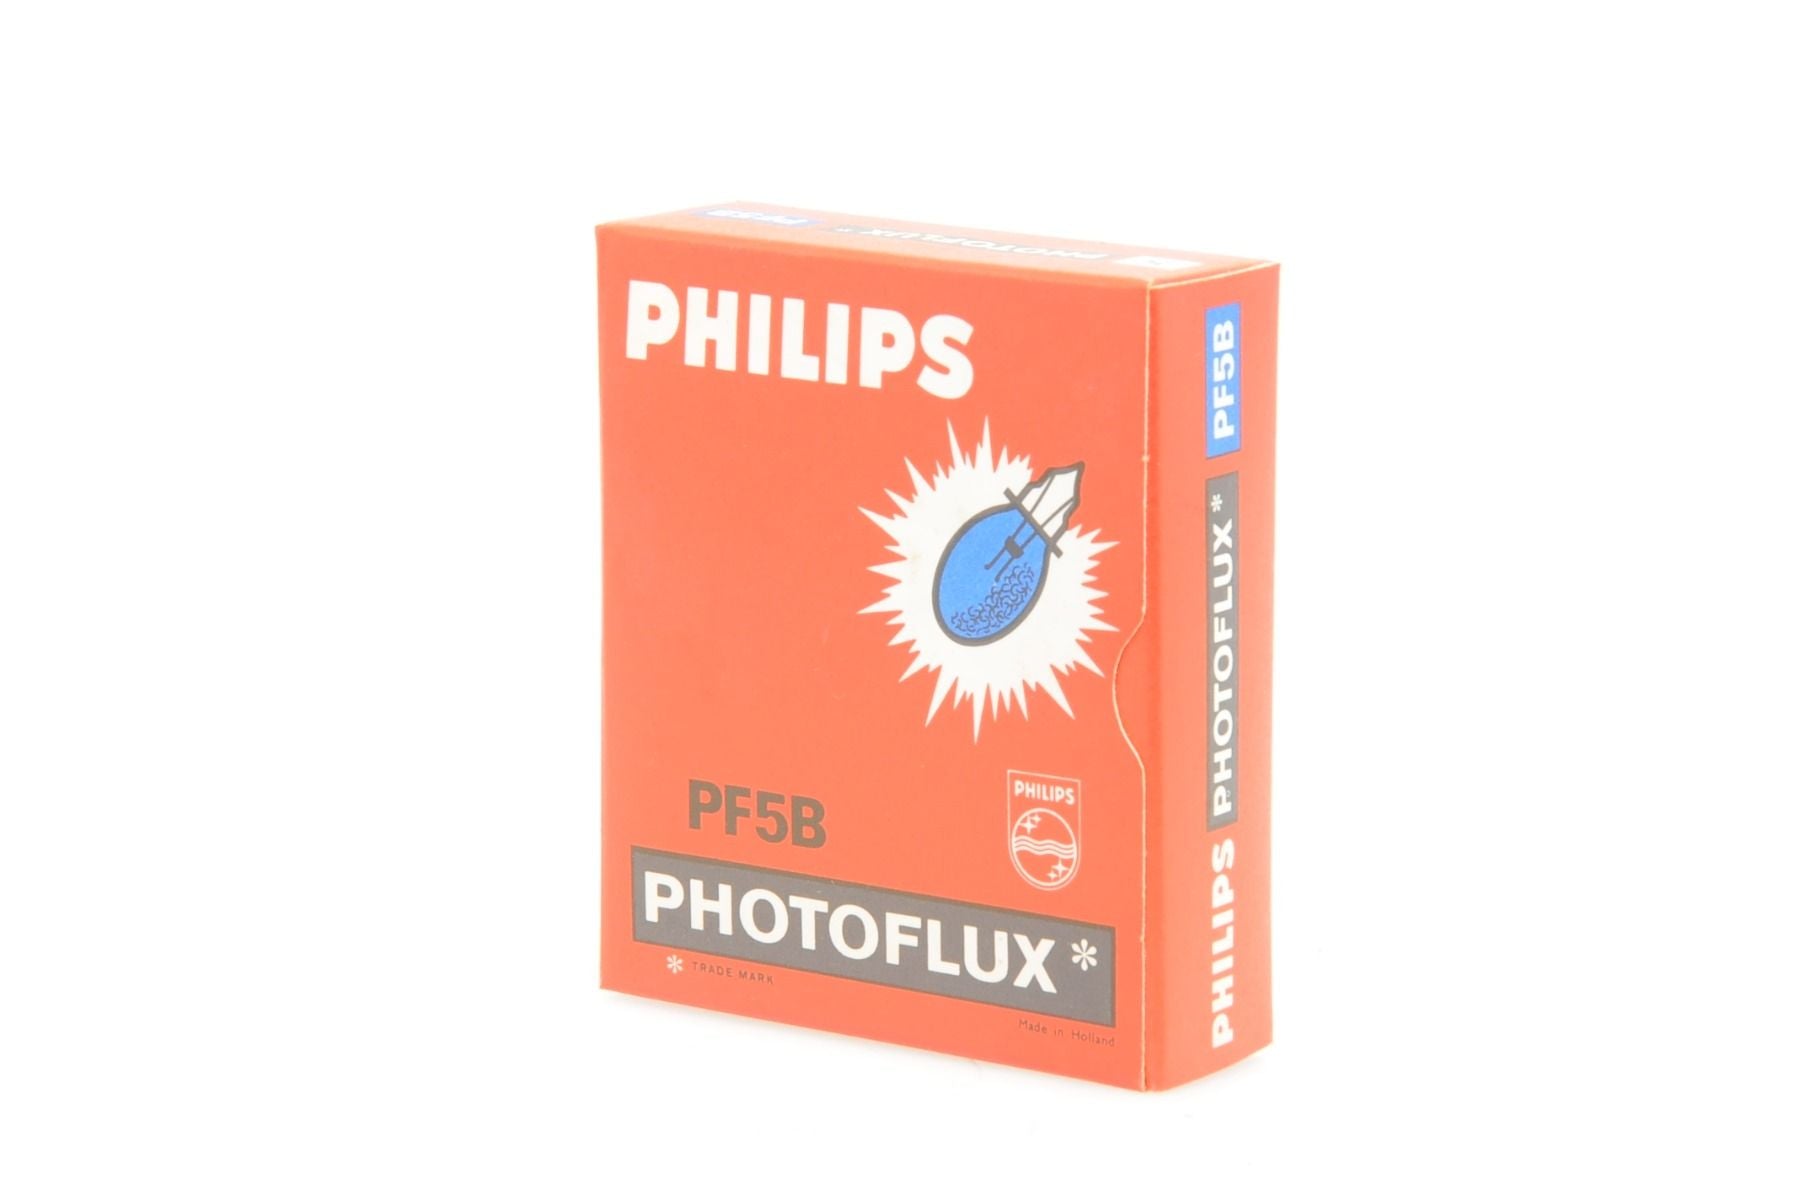 Product Image of New Old stock Box Philips PF5B Photoflux flash bulb (5Pack)